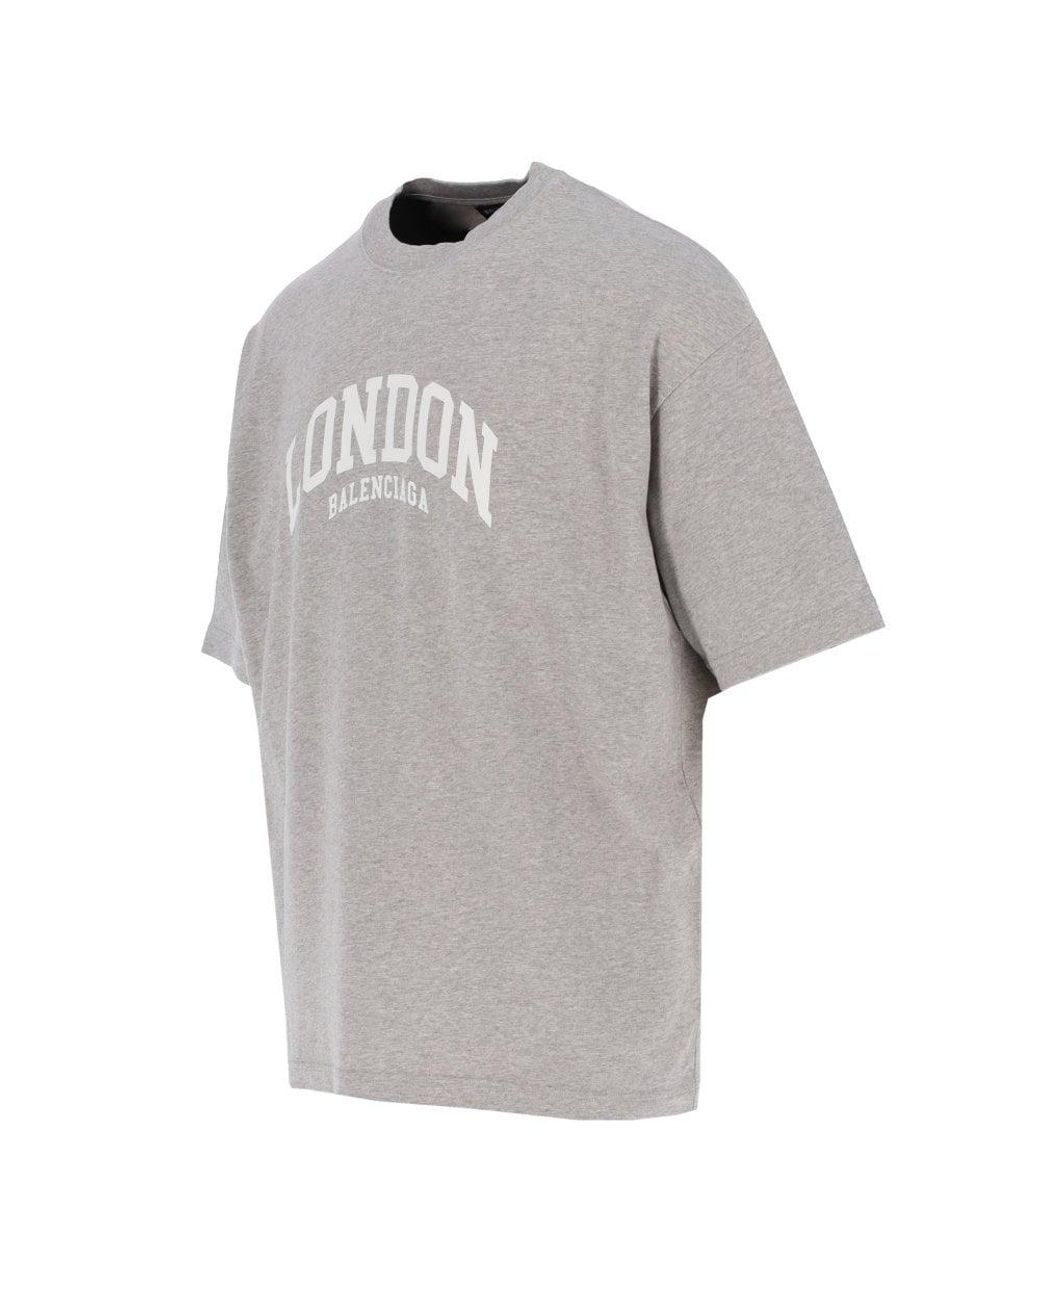 Balenciaga Cotton Grey & White Cities Series London Oversized T-shirt in  Grey/White (Gray) for Men - Lyst